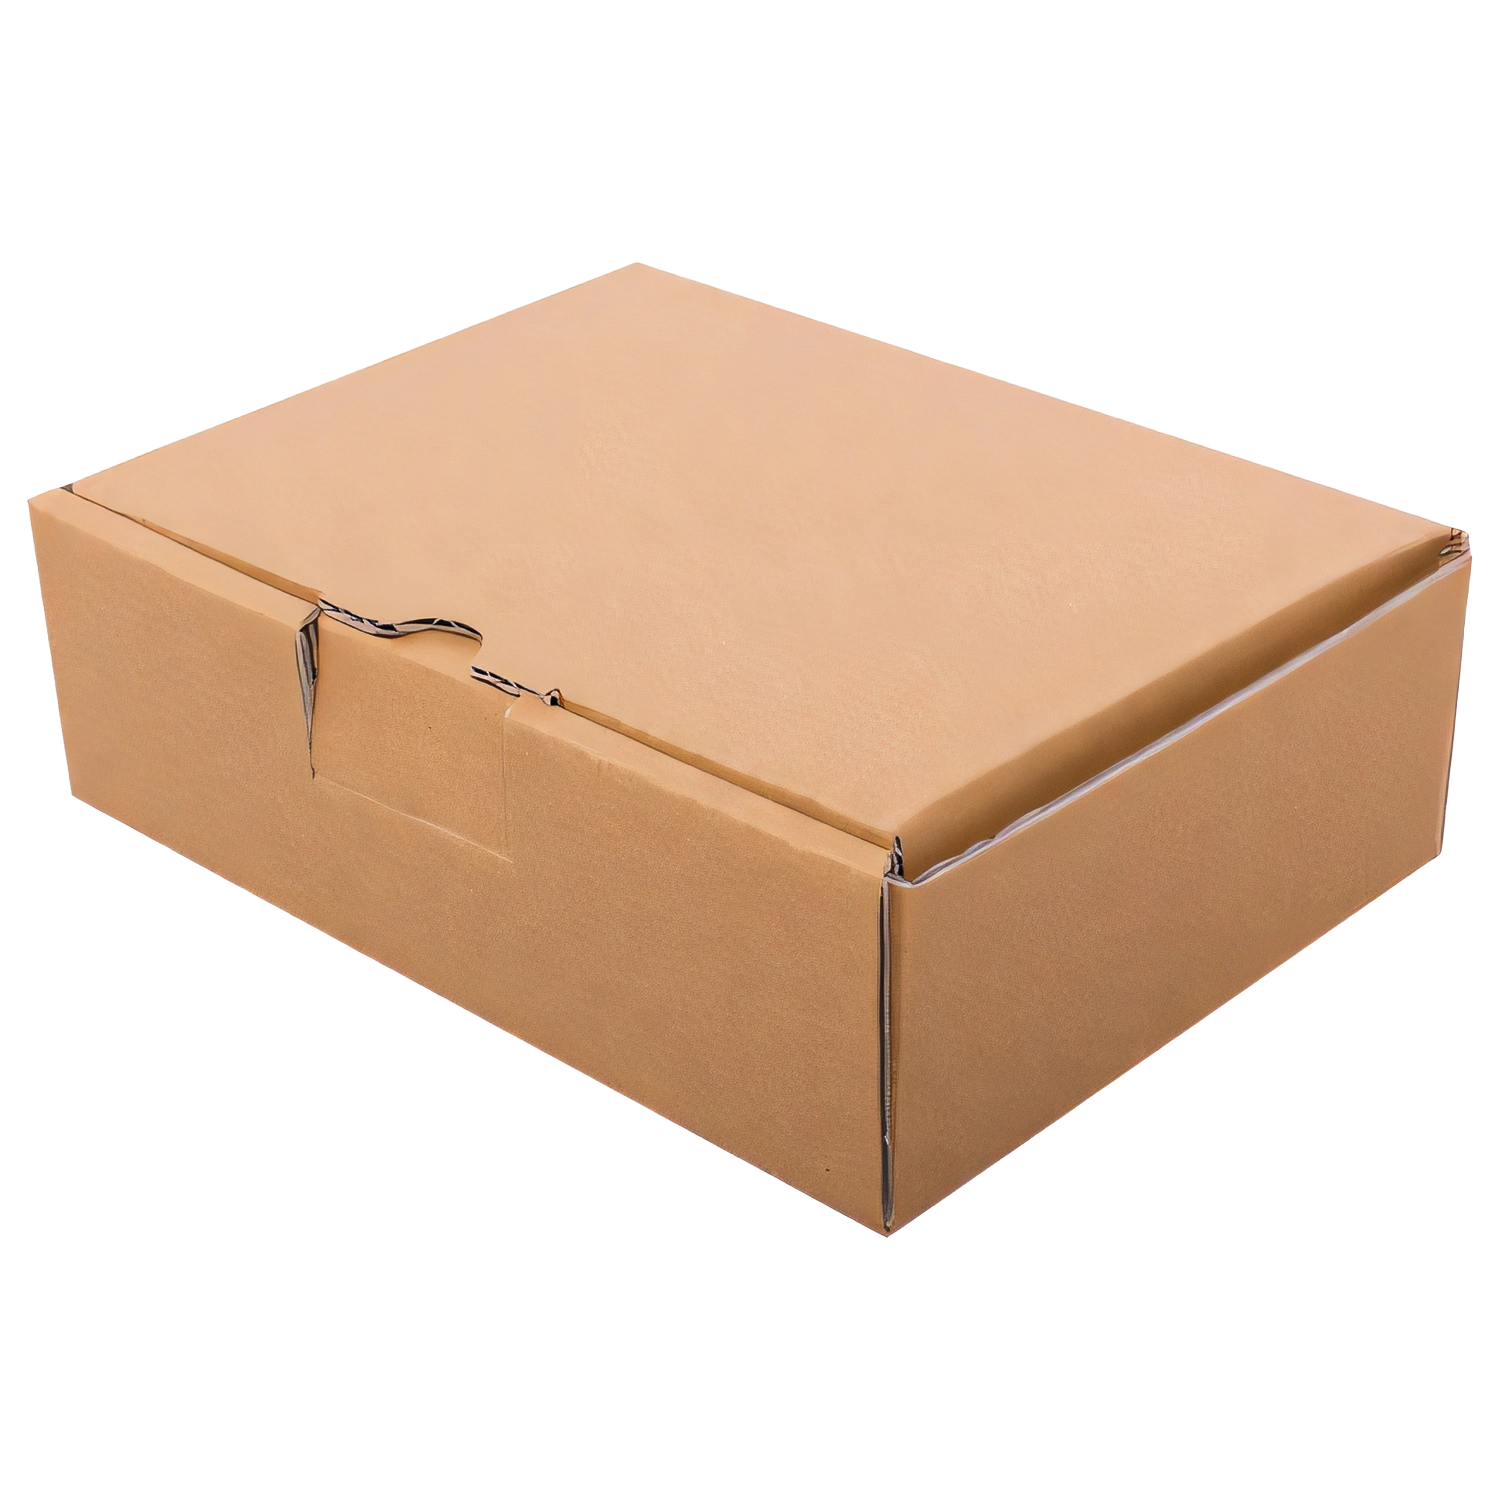 Midi Small Royal Mail Boxes - Shipping Boxes 13.1x7.9x2.6 Inch Closed